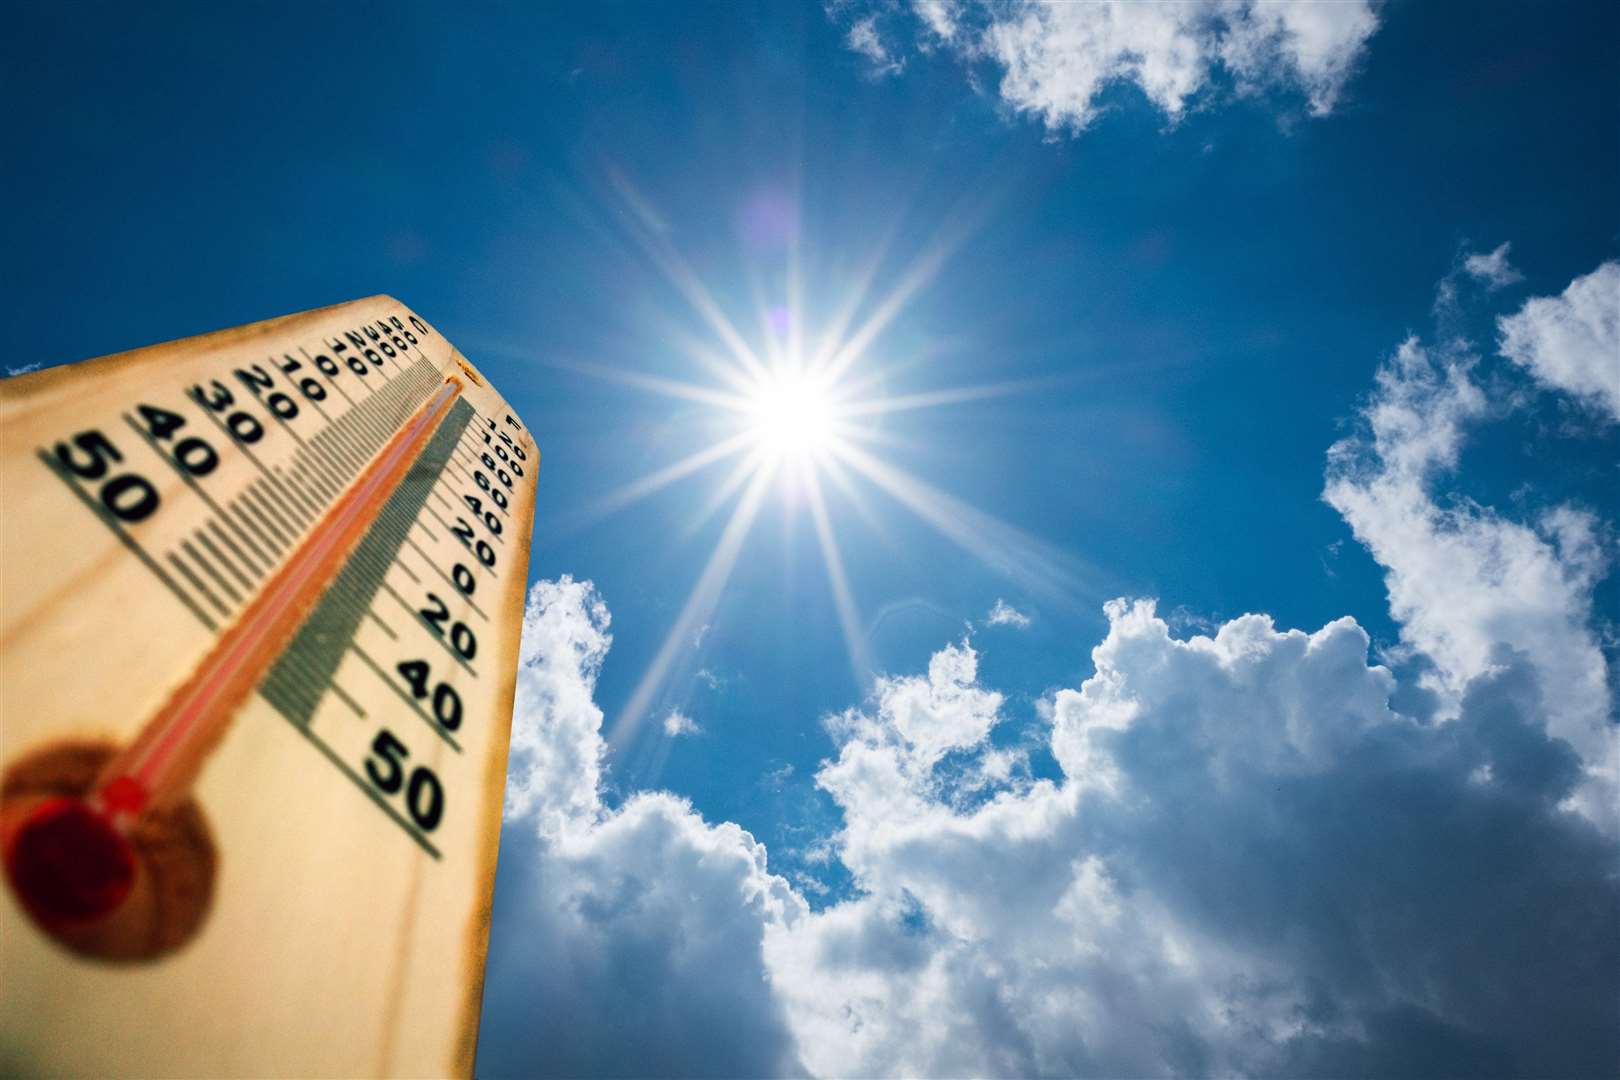 The hot weather will continue for today. Stock Image